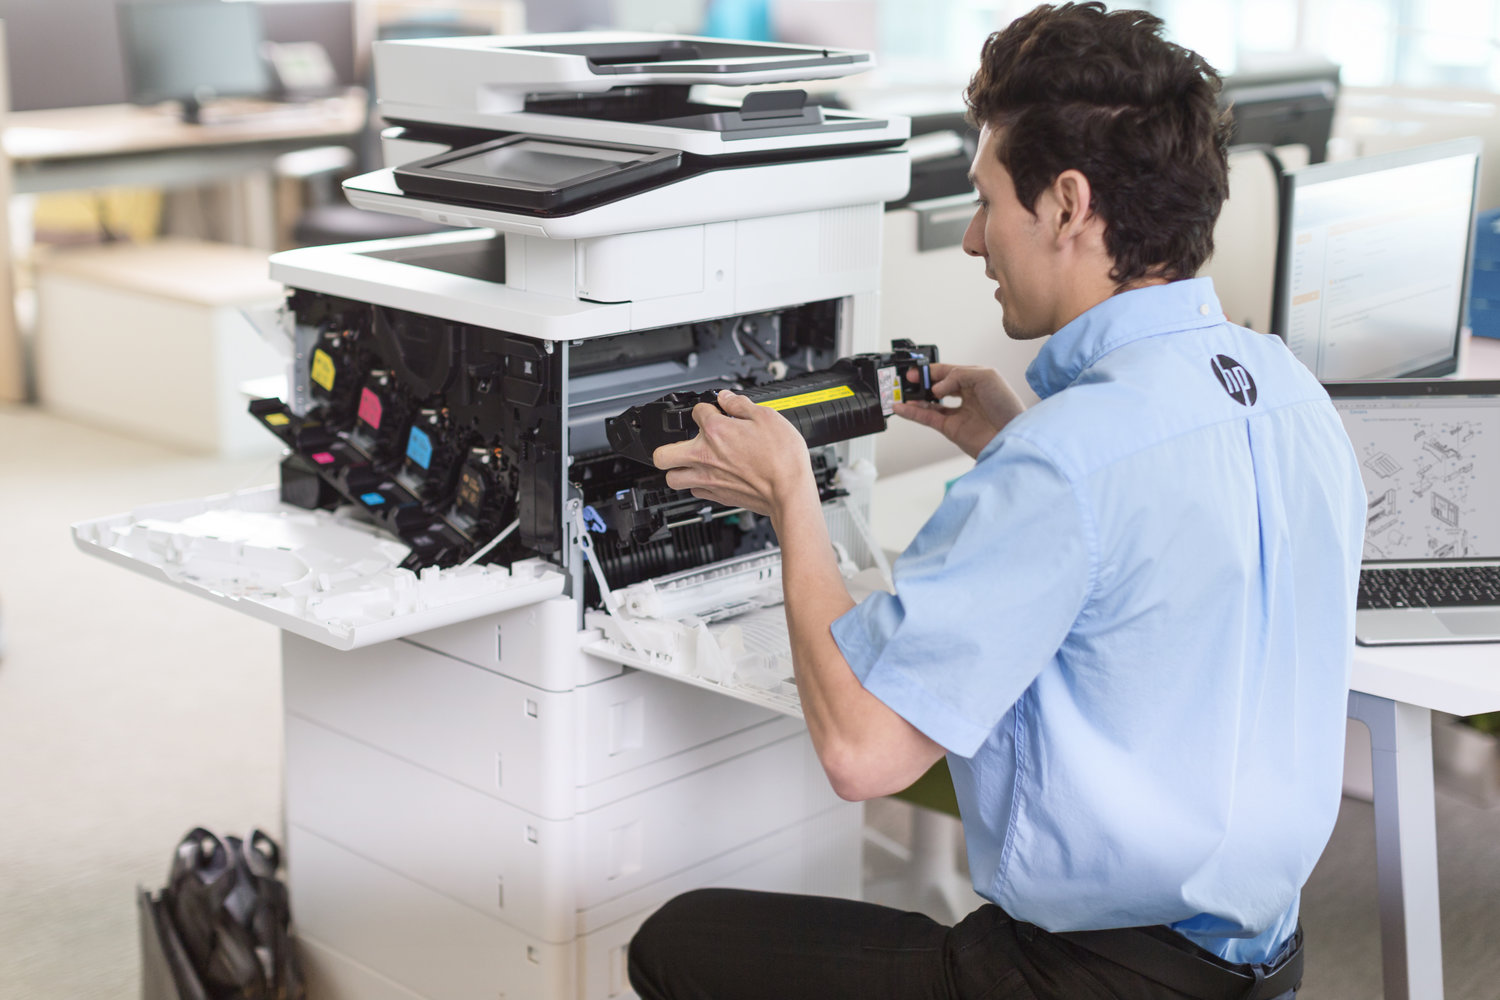 How To Install Toner Cartridges In Your Laser Printer?